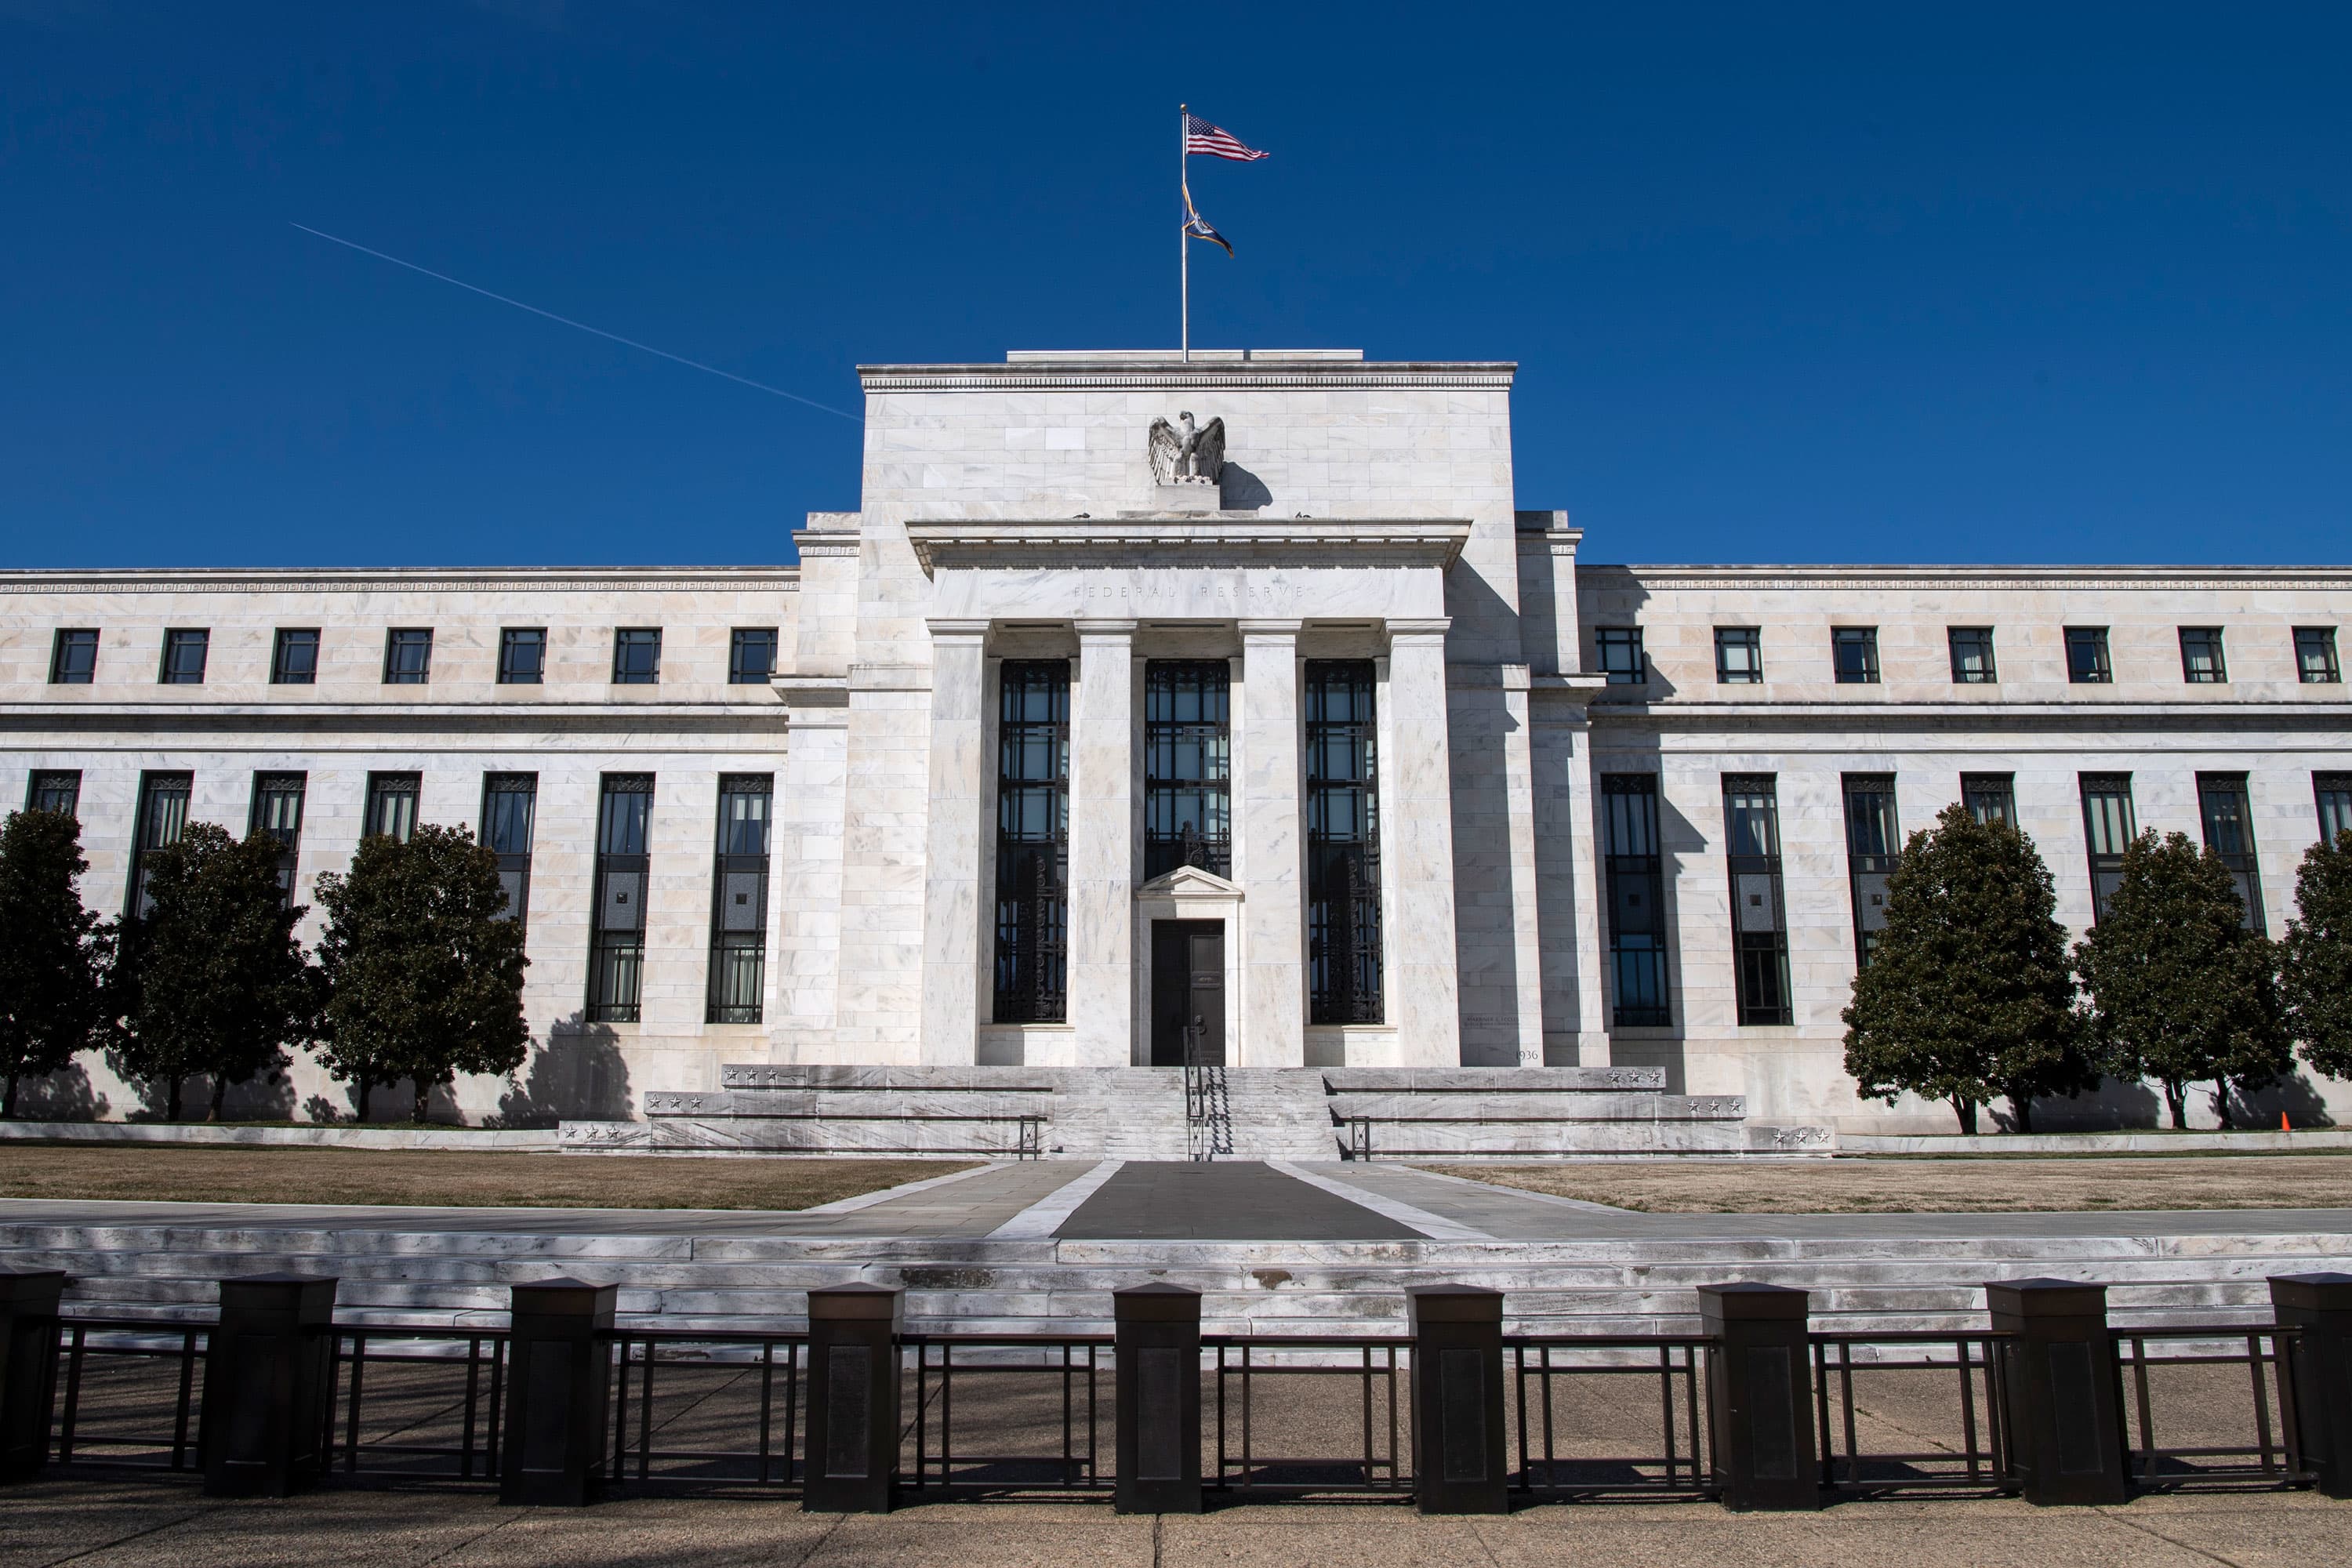 Half of the Fed members now see the central bank hiking rates next year